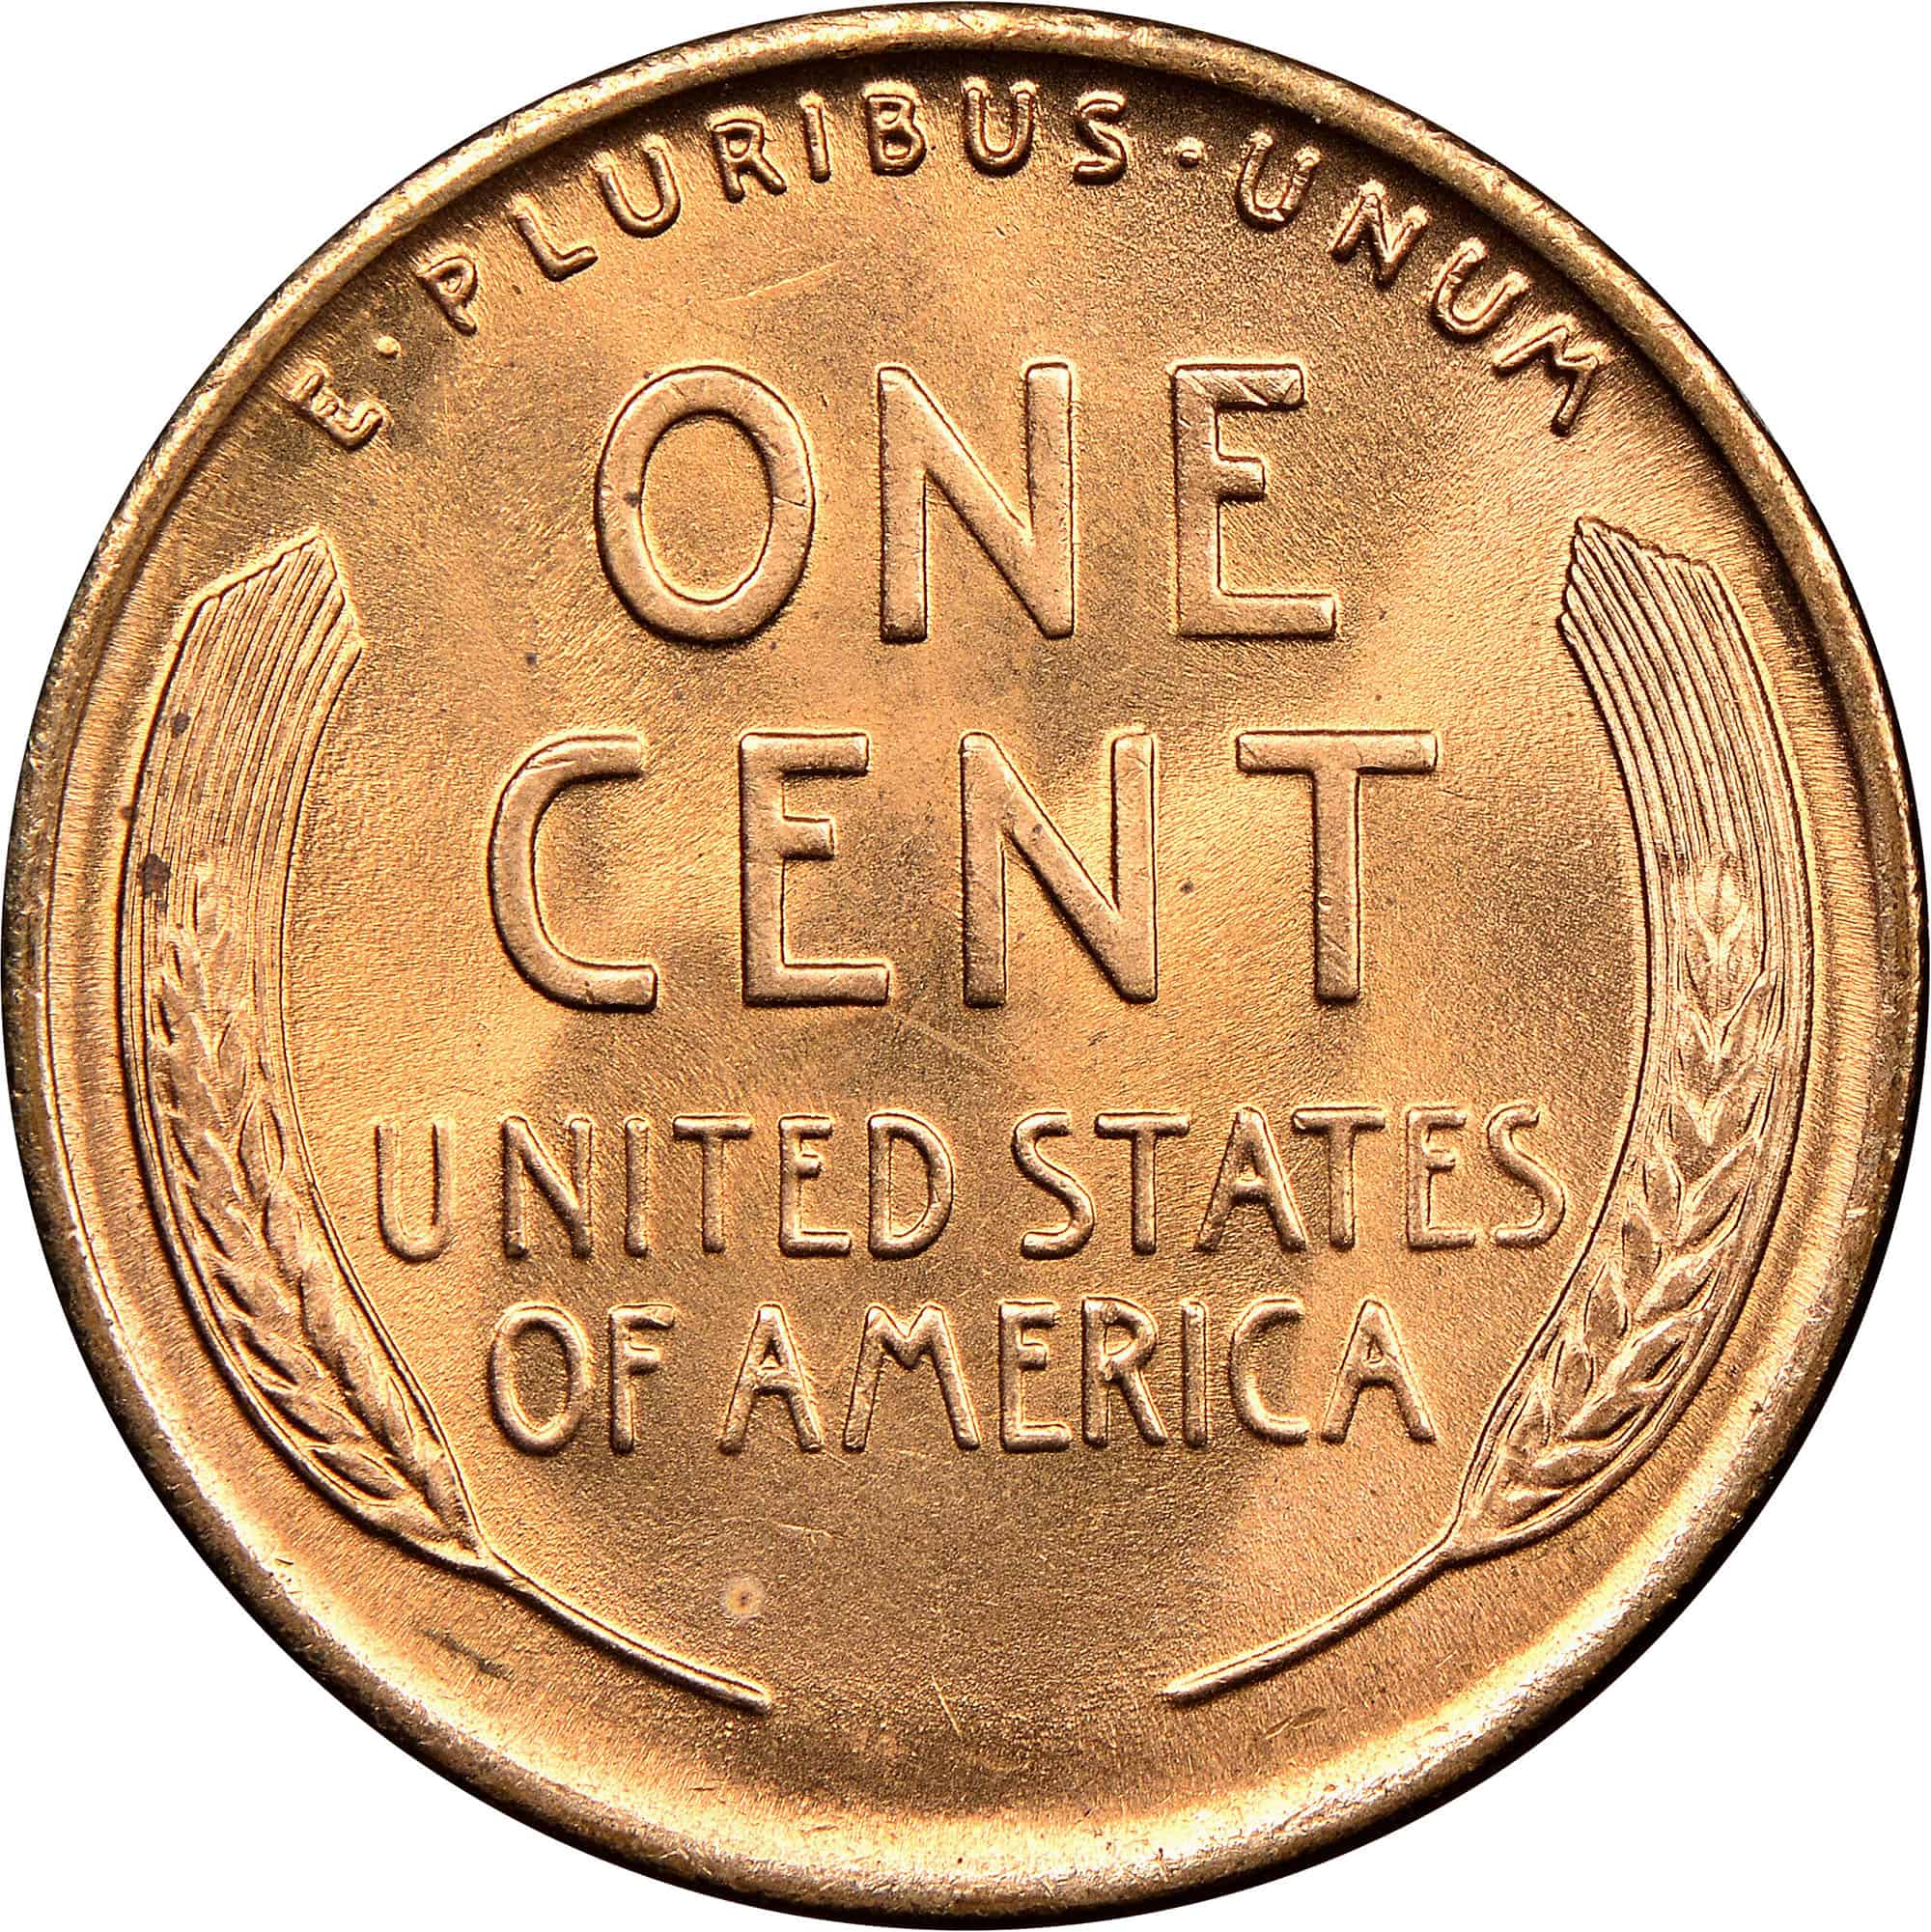 The reverse of the 1934 Lincoln penny